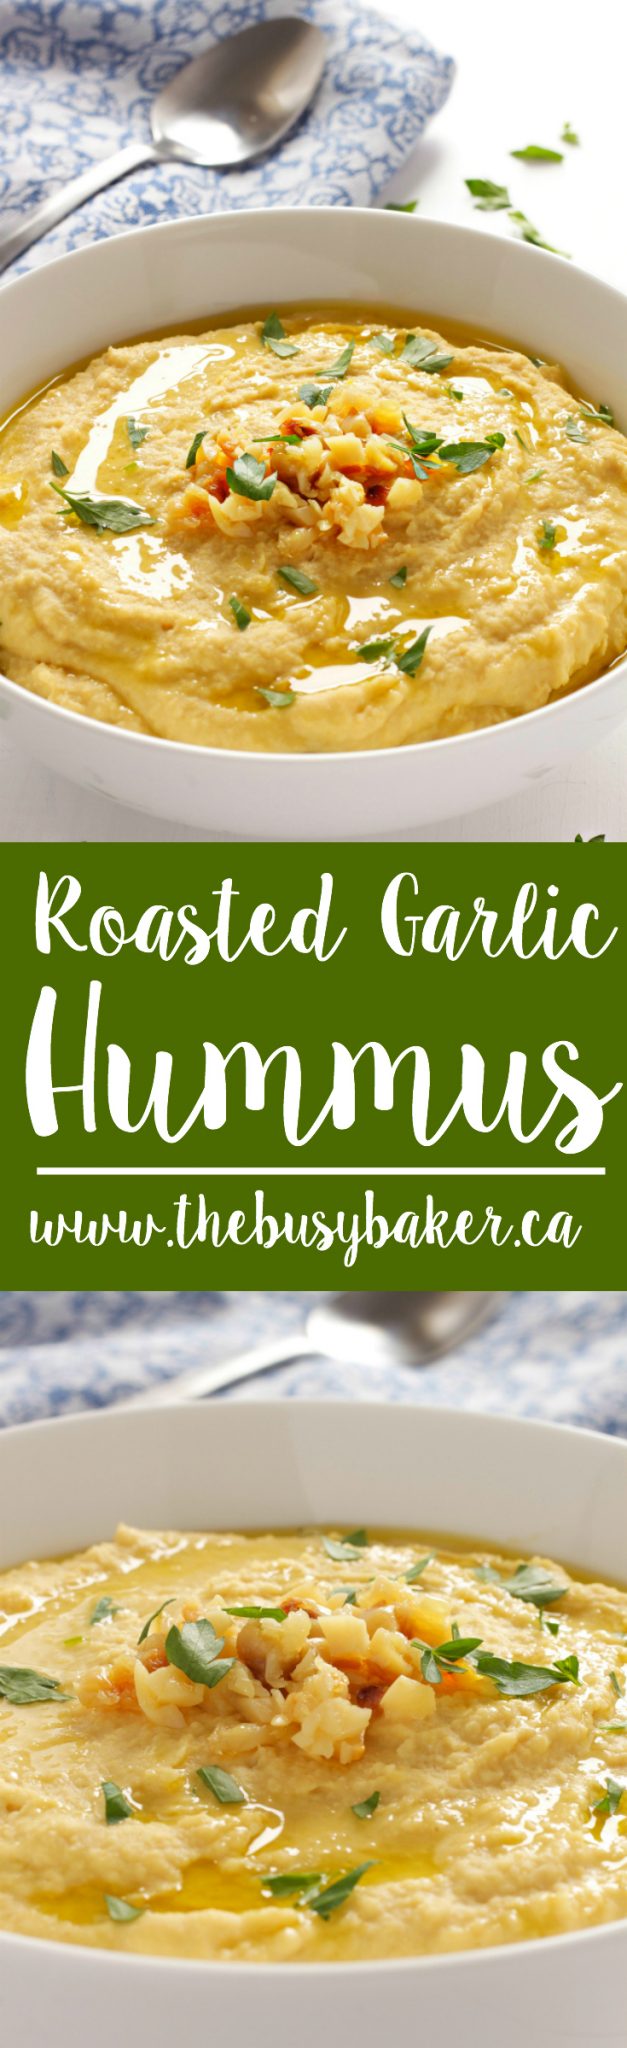 This Roasted Garlic Hummus is the perfect healthy snack or lunch. Make it easily in your blender or food processor with basic pantry staples! Recipe from thebusybaker.ca! via @busybakerblog